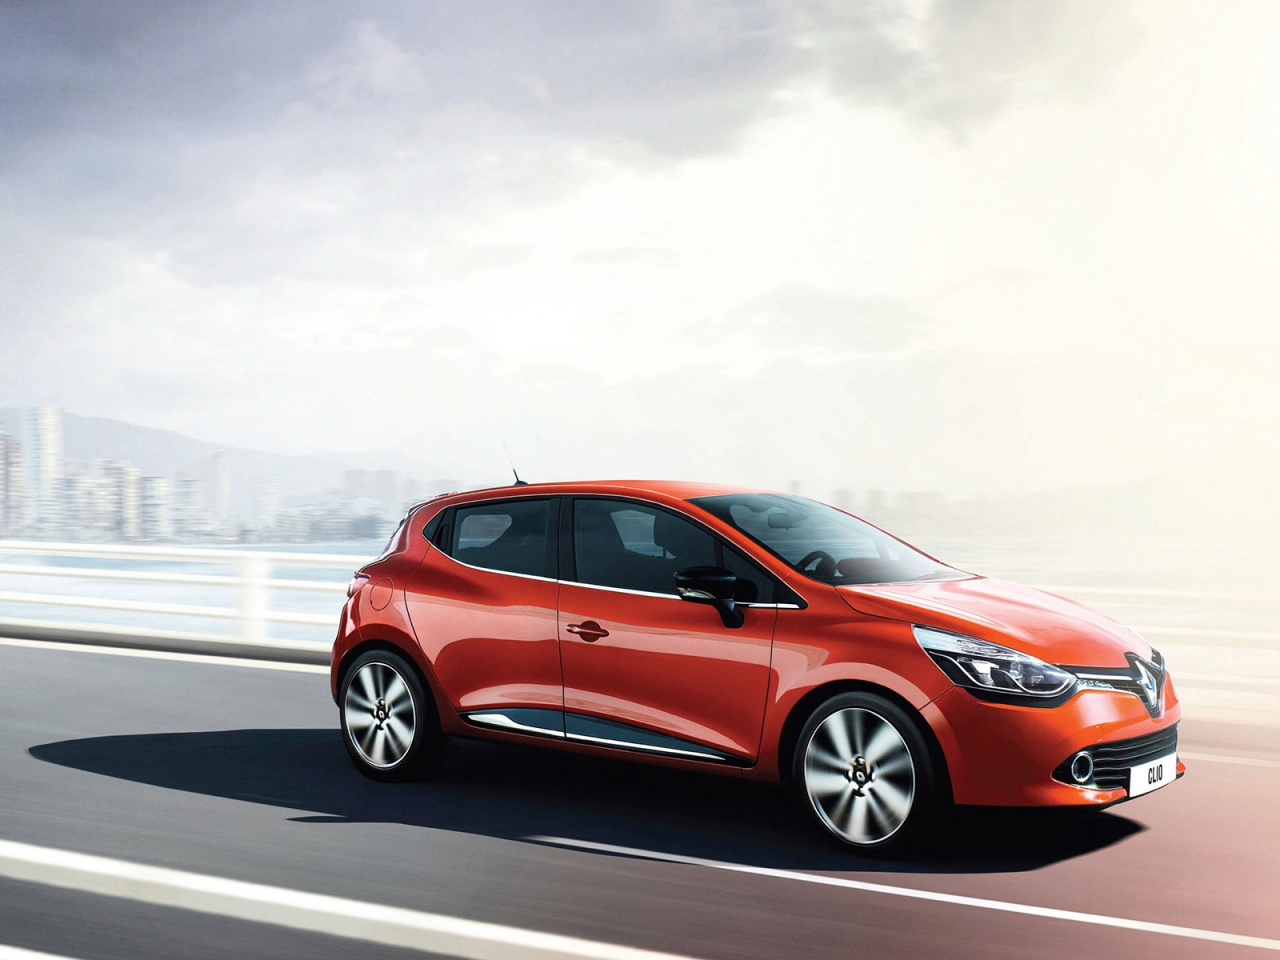 2013 Renault Clio for 1280 x 960 resolution